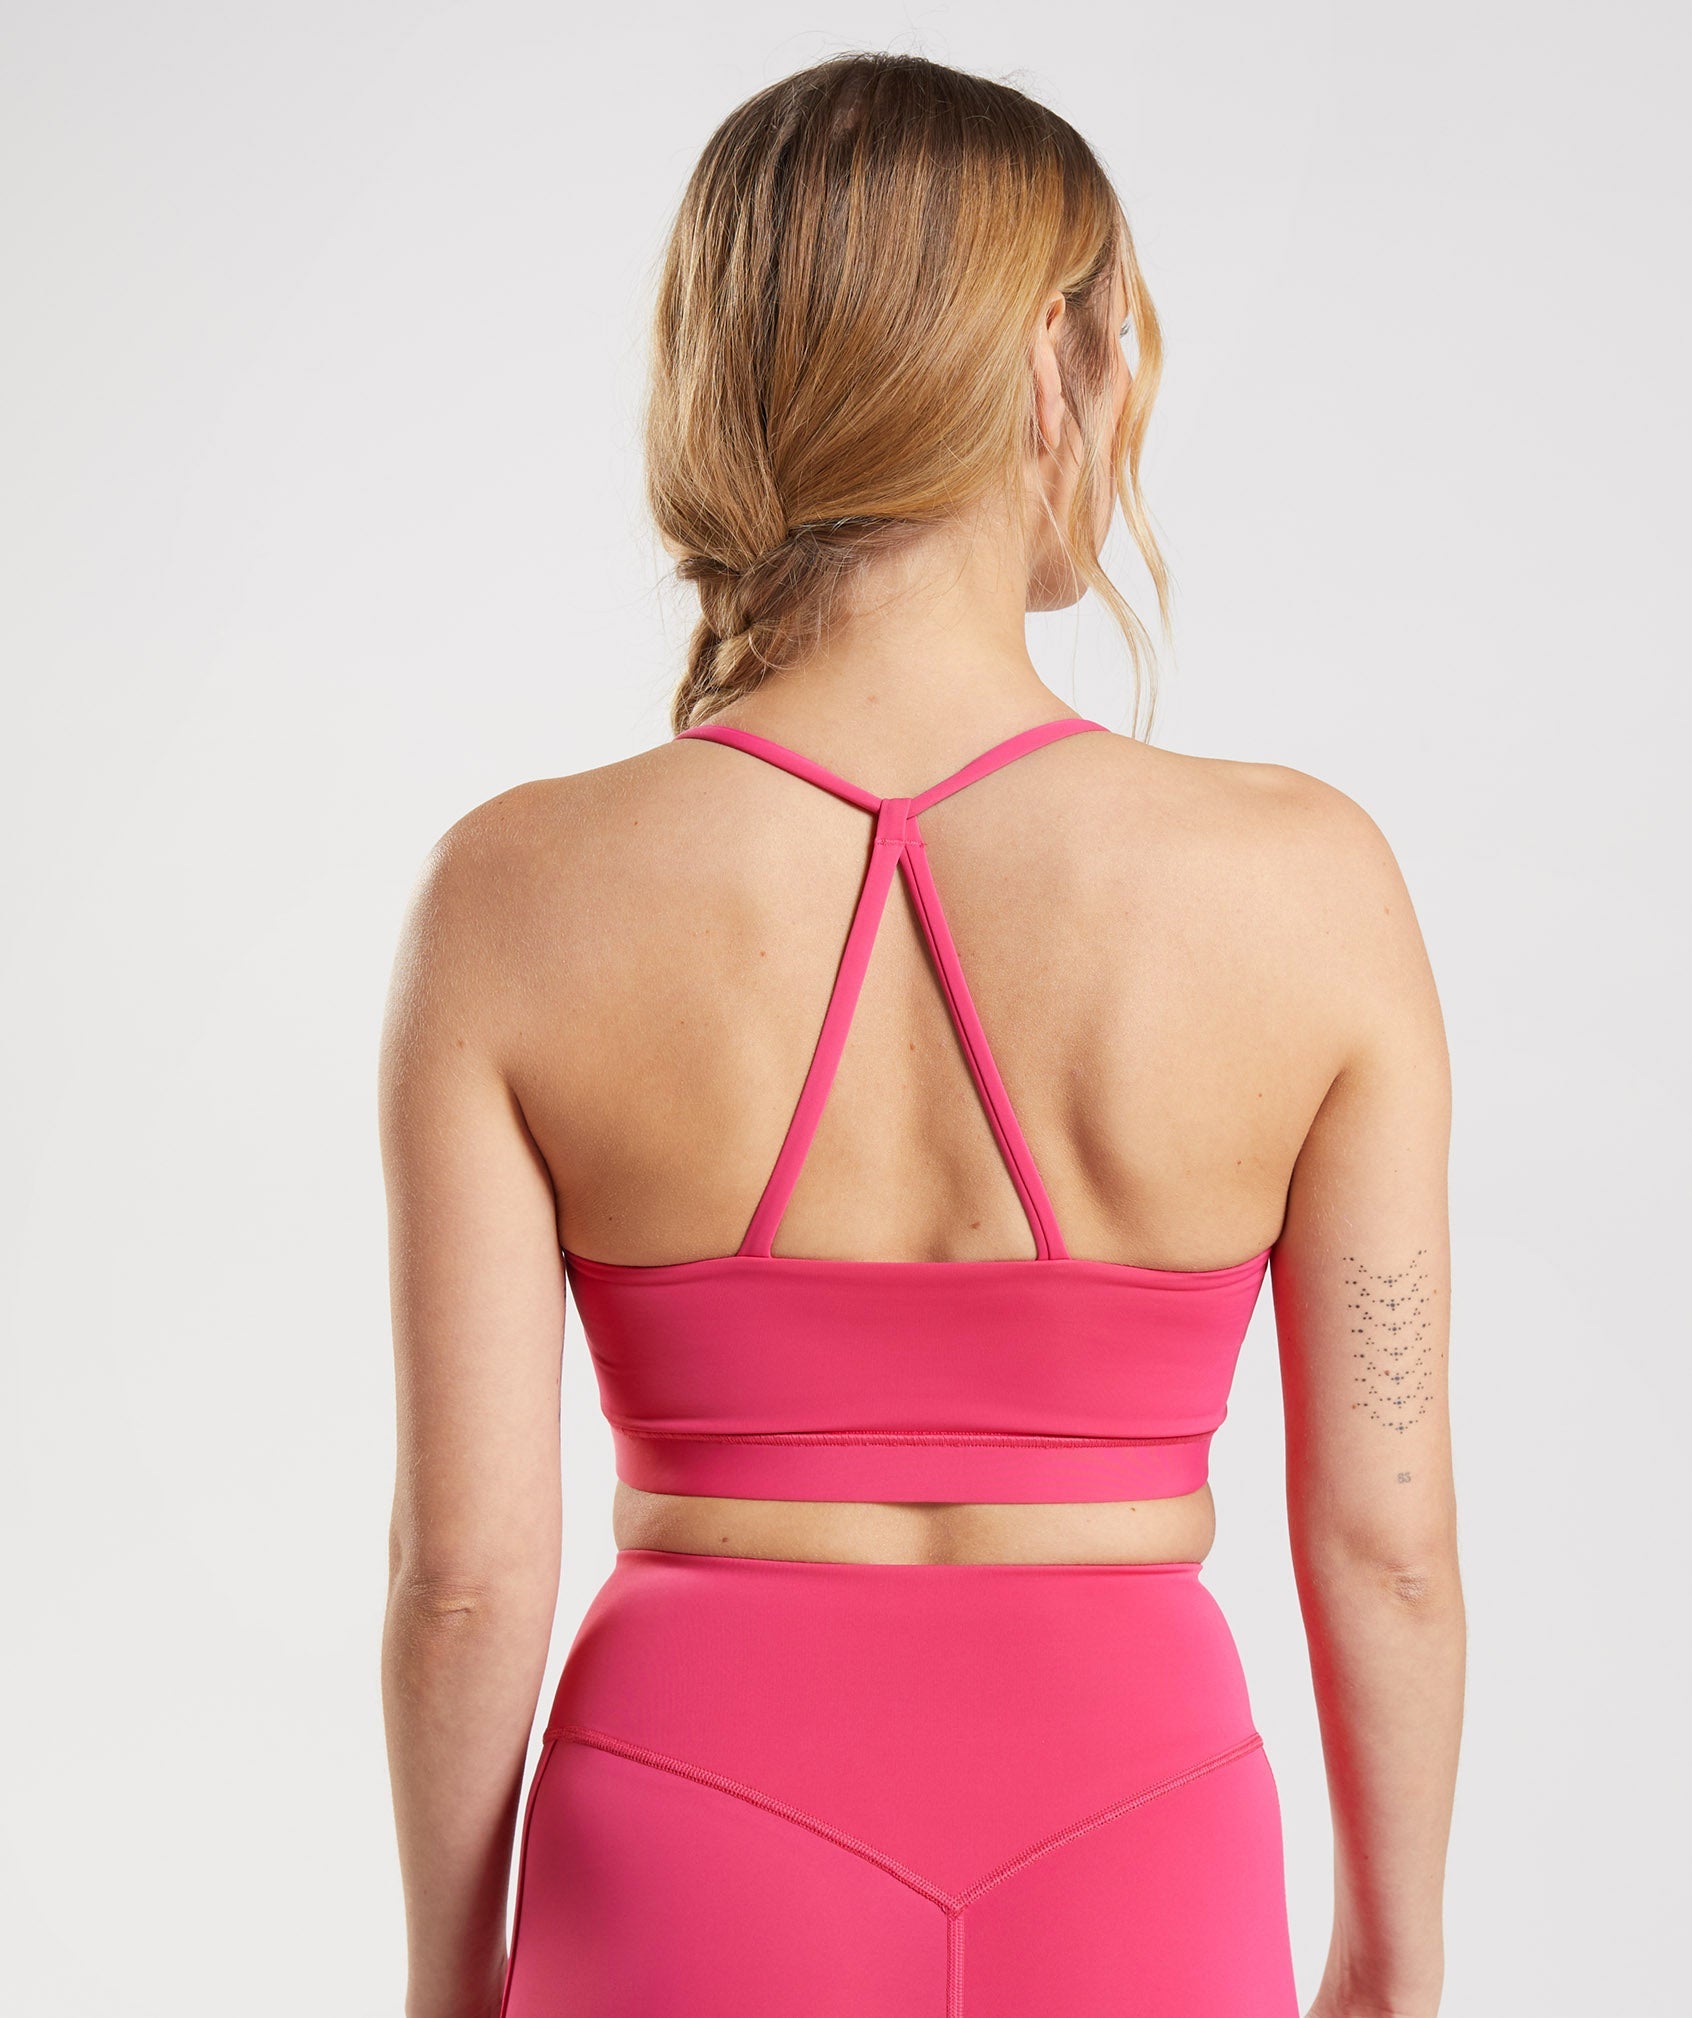 Do you like this hot pink bralette from the BOLD and BRIGHT